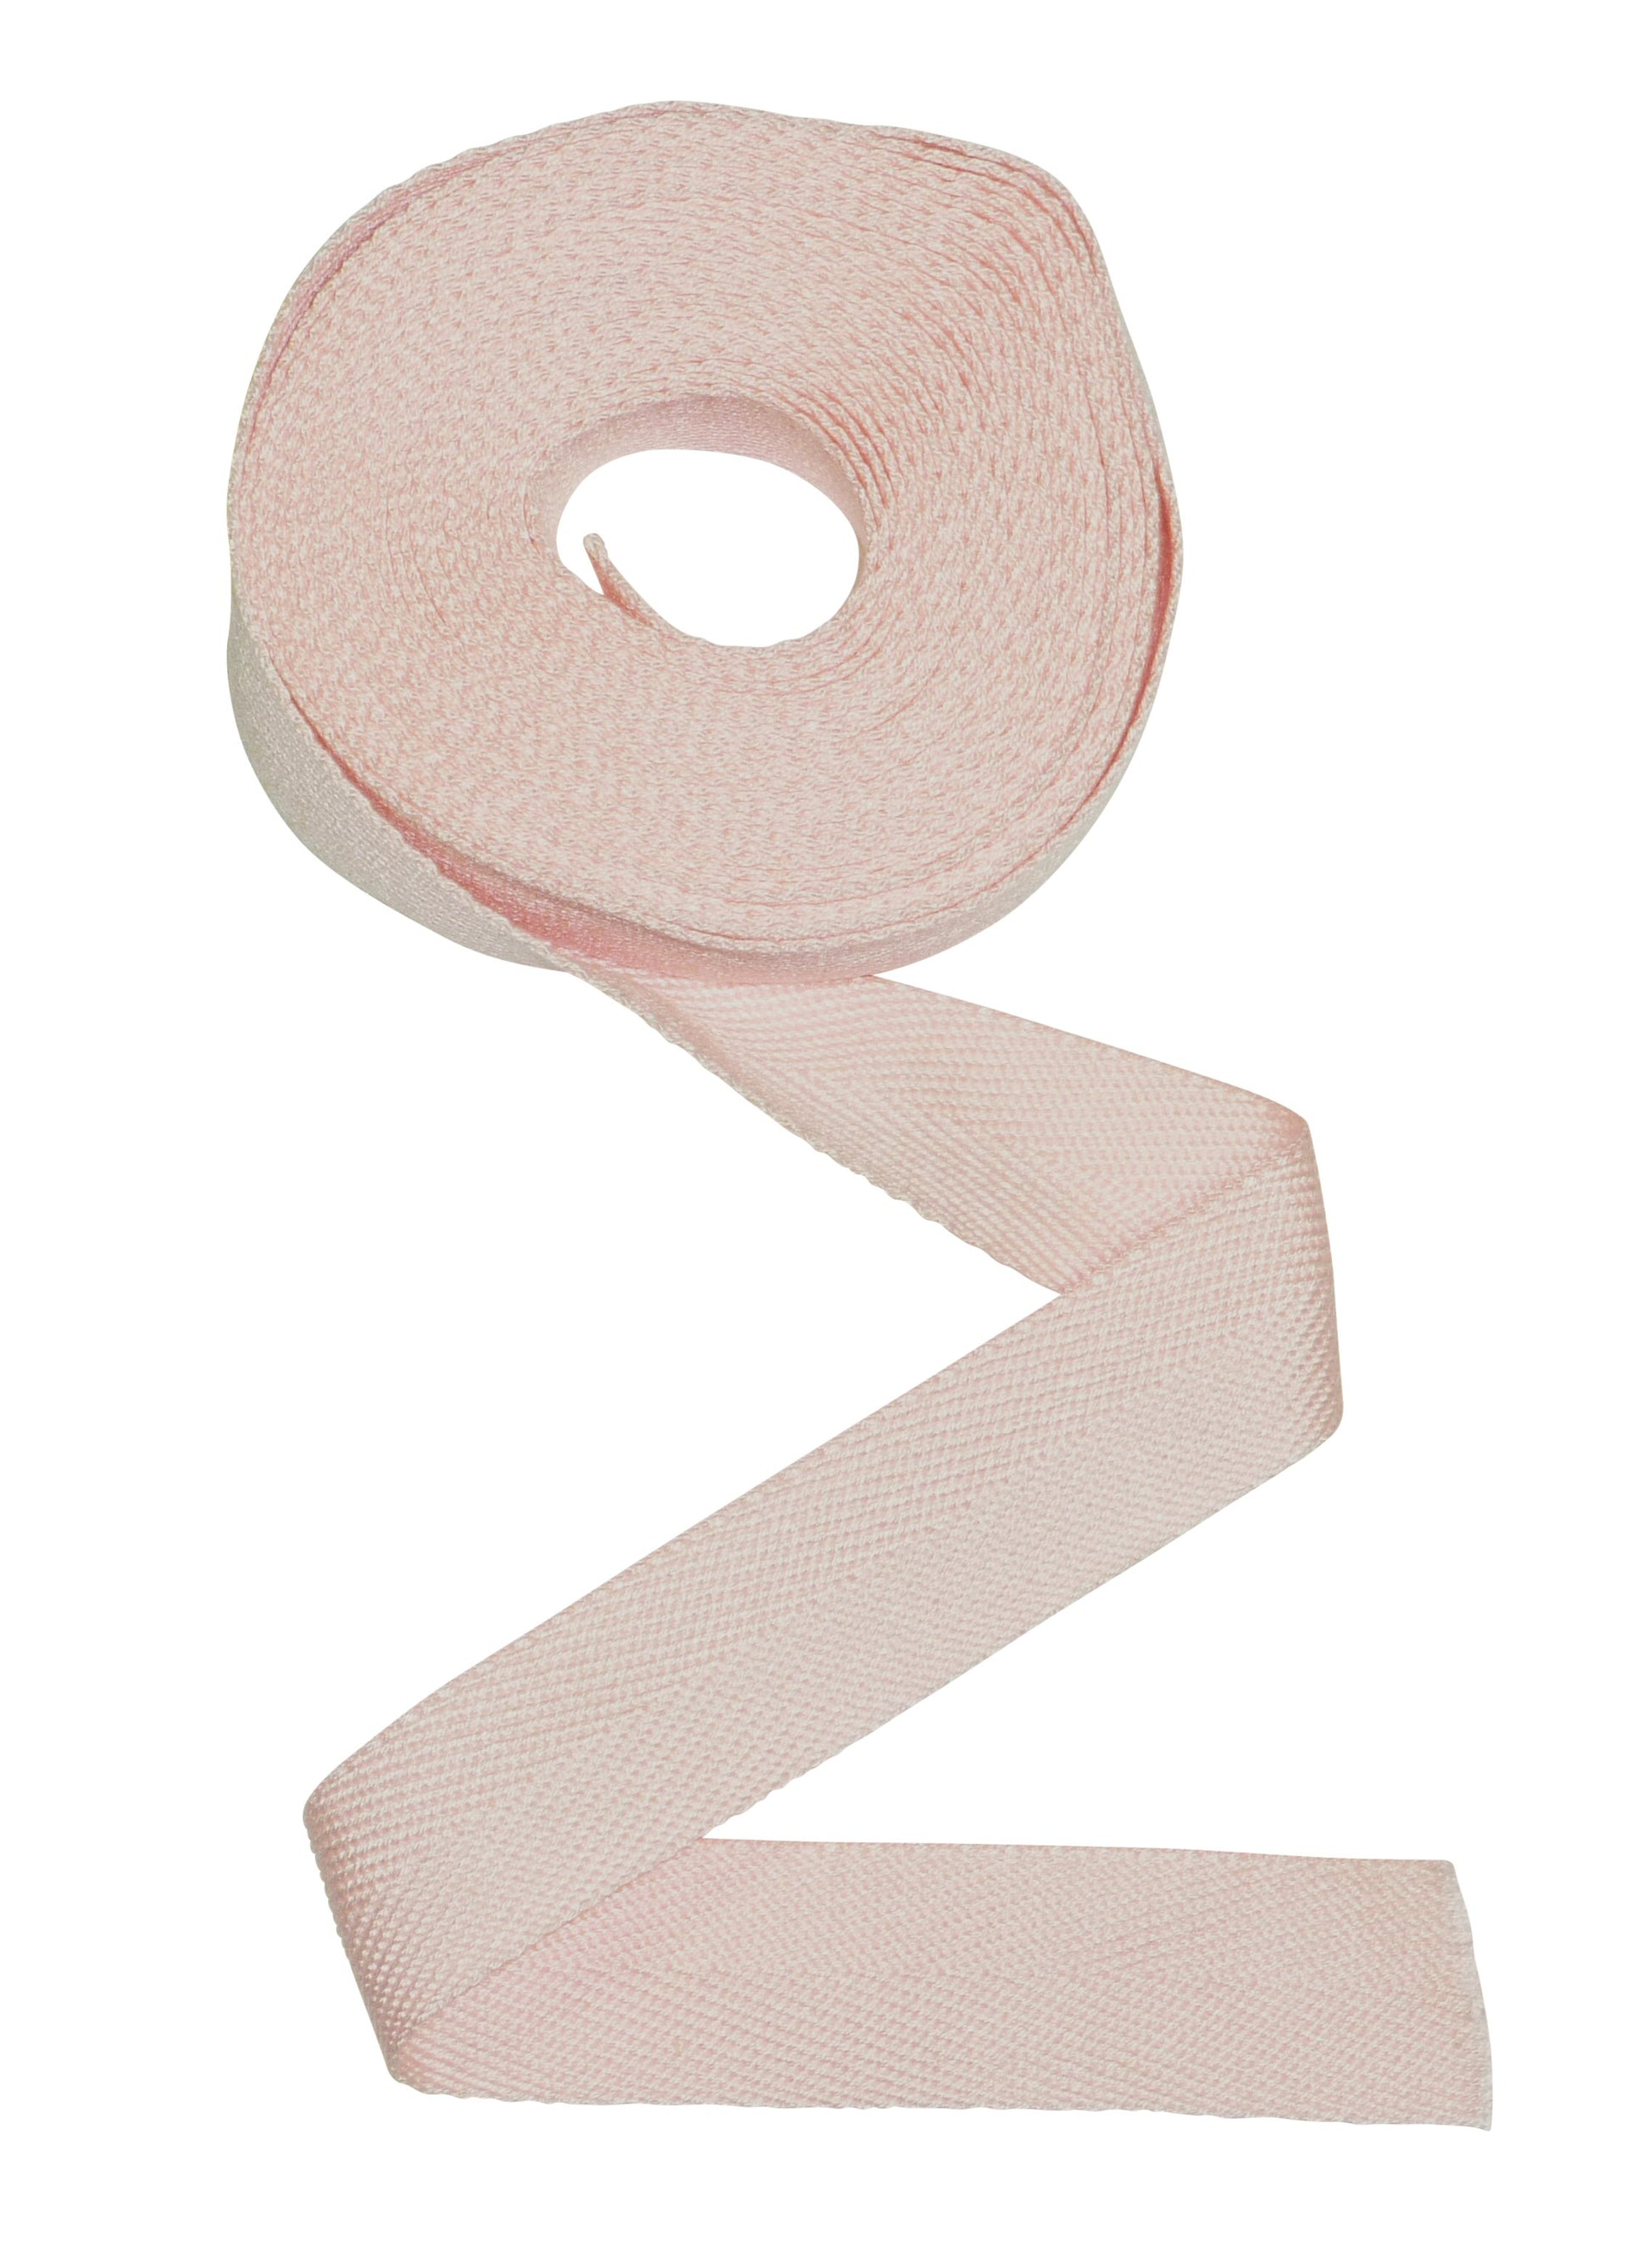 Benristraps 25mm Acrylic Twill Tape, 5 Metre Length in pink